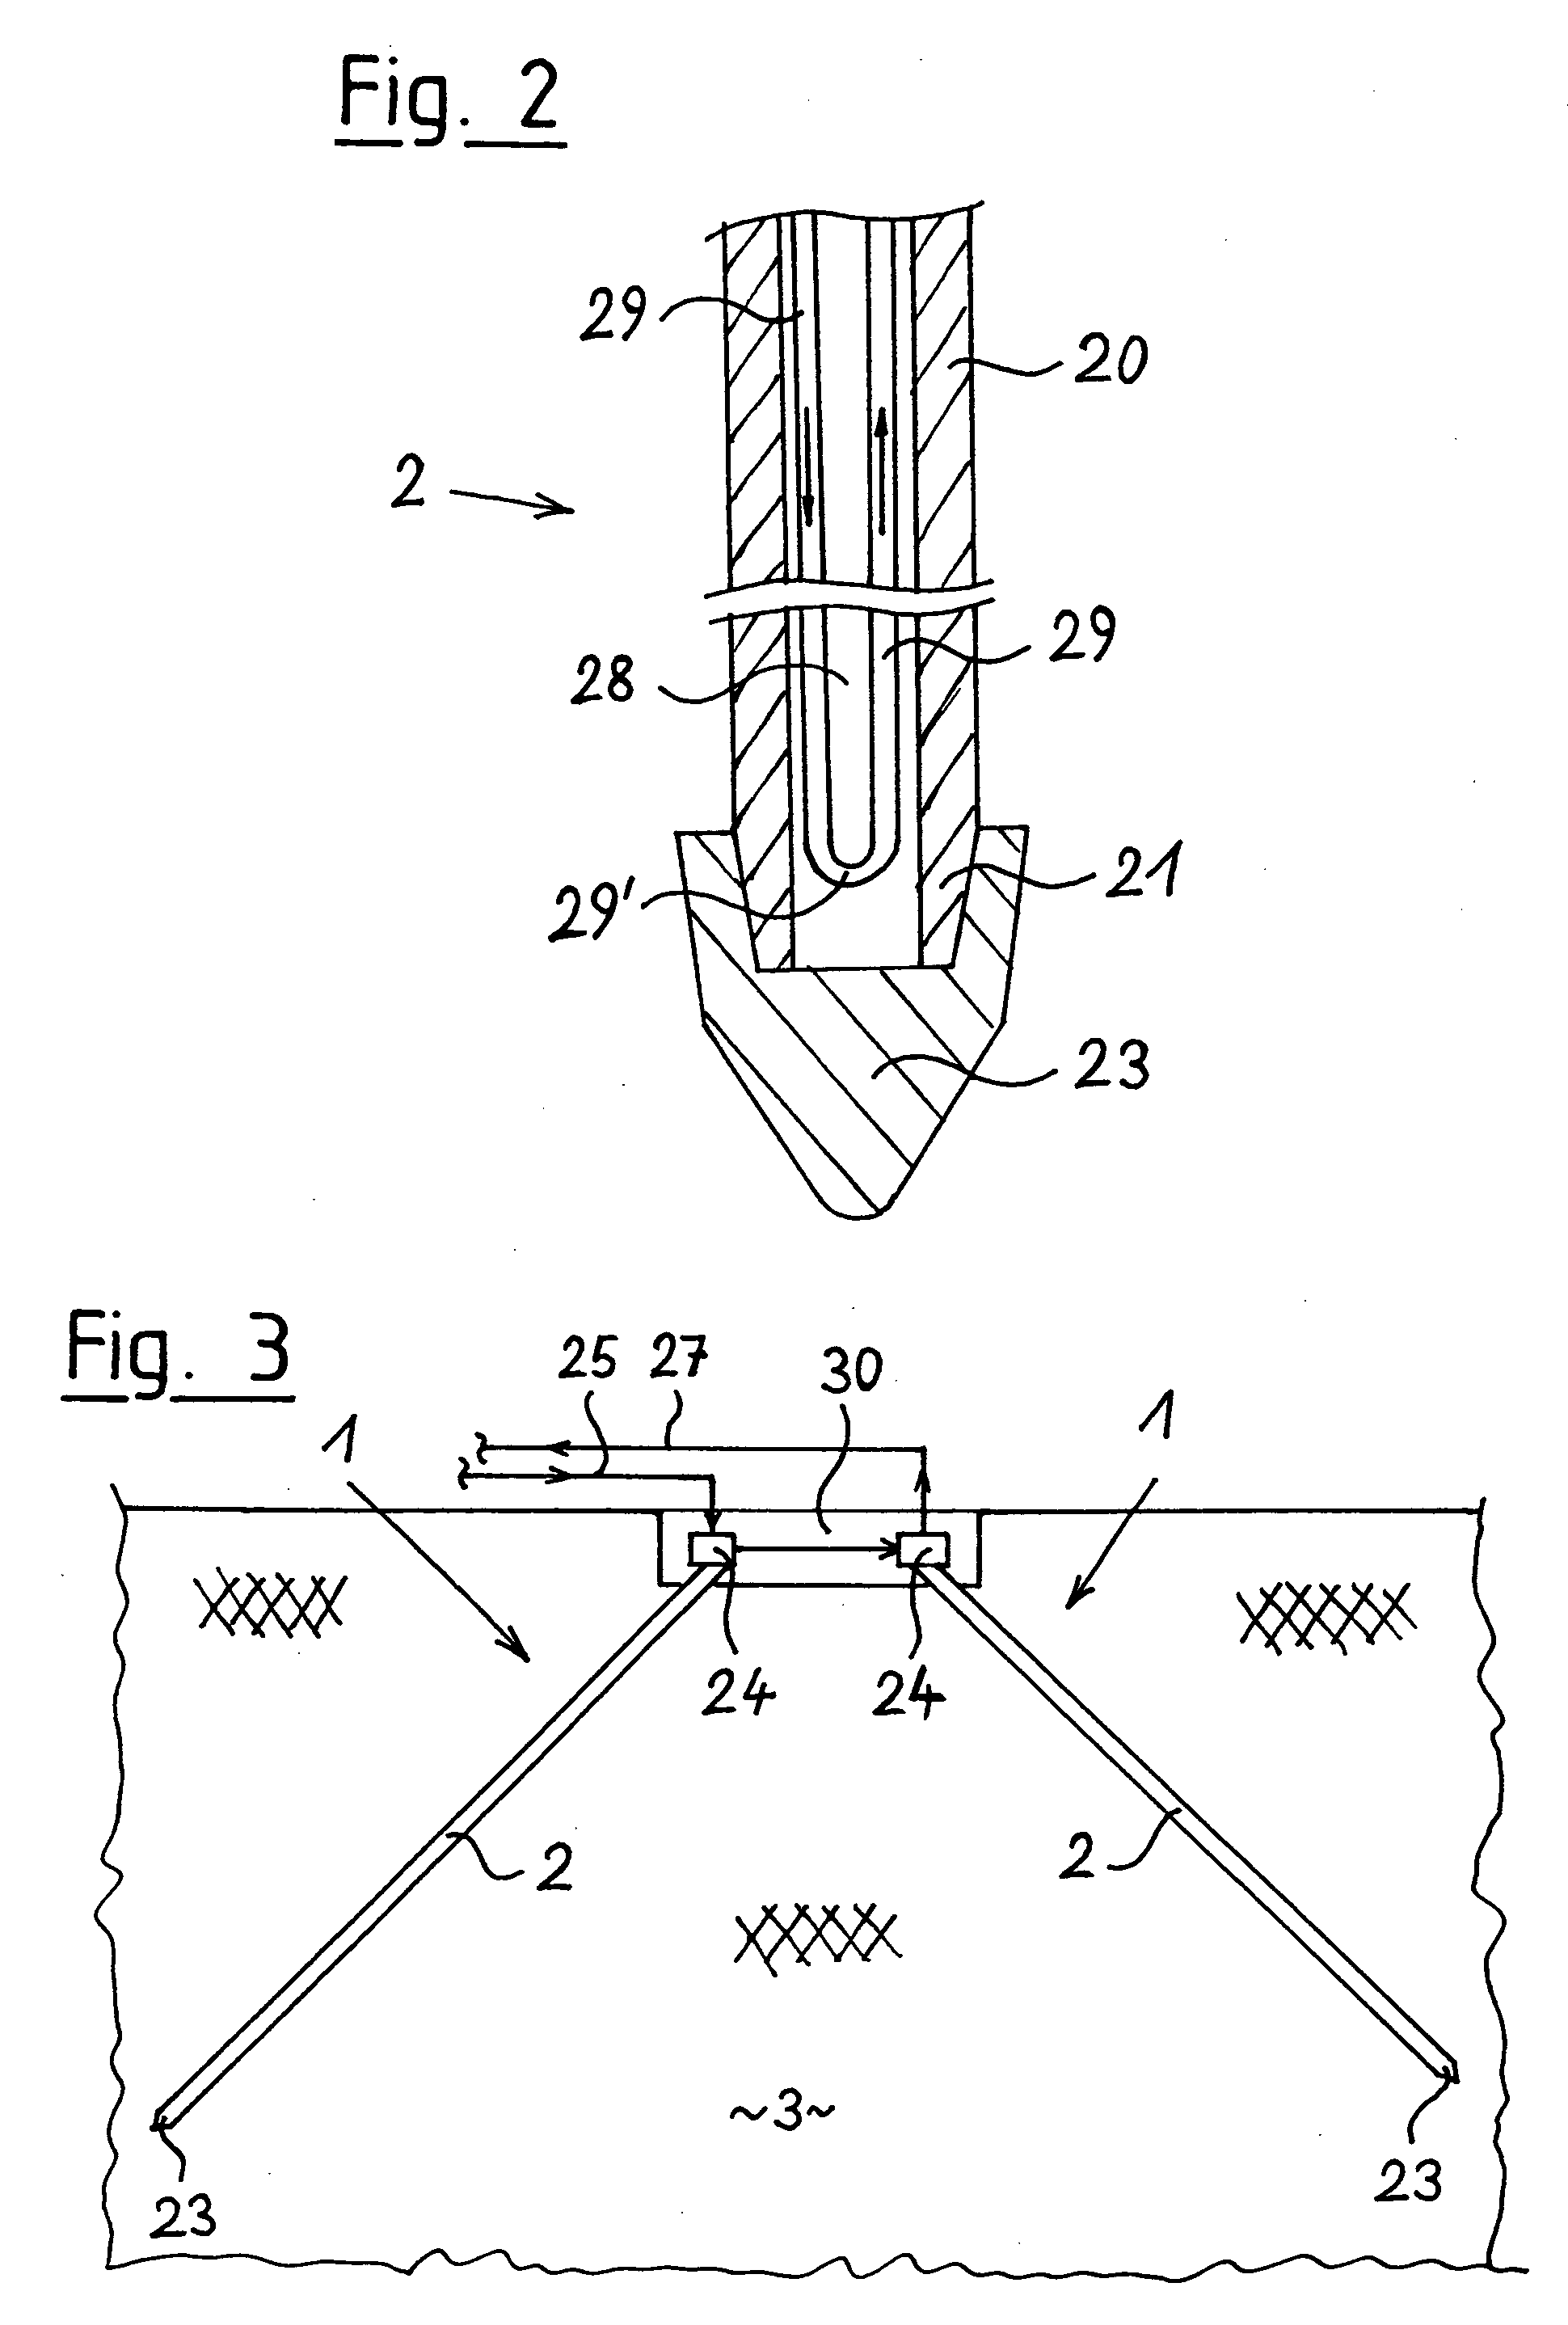 Heat source or heat sink unit with thermal ground coupling